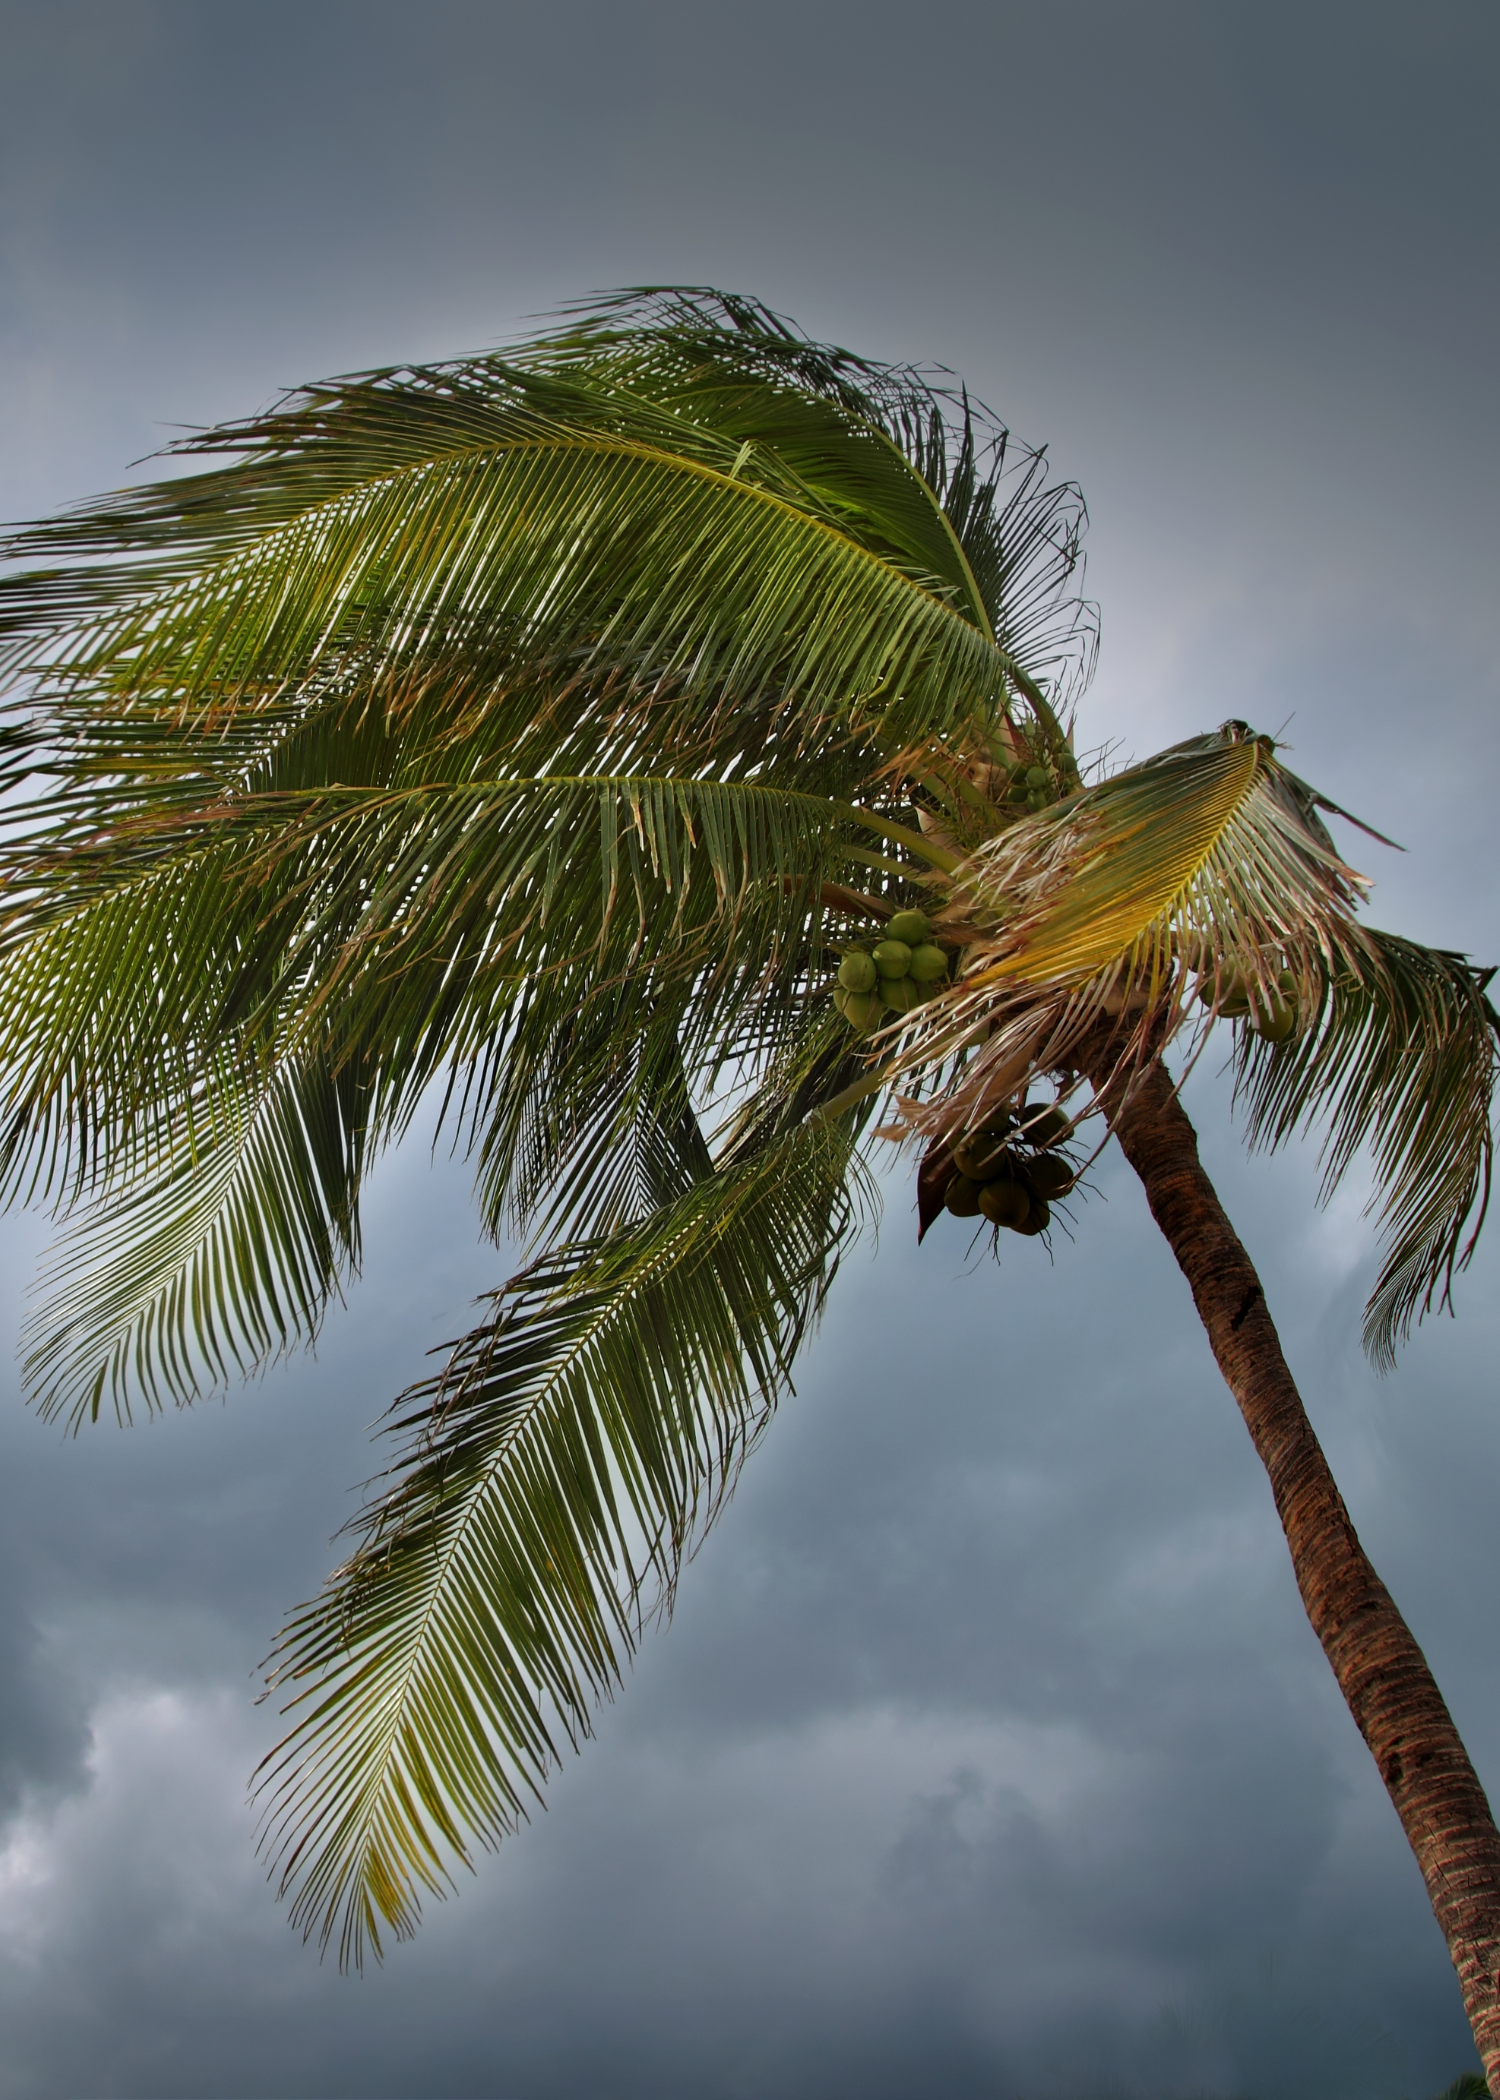 A palm tree bends and sways vigorously in hurricane winds.